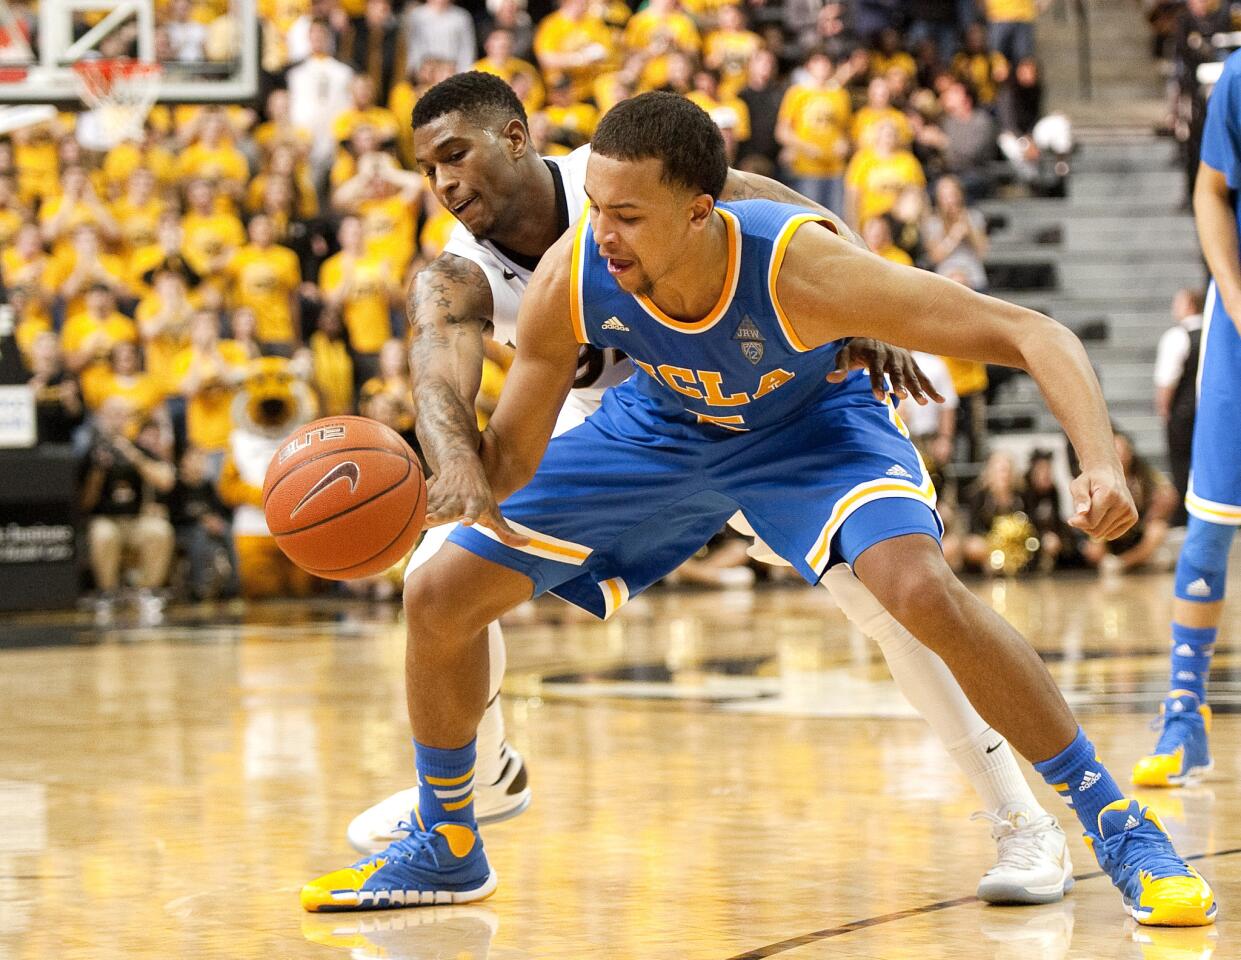 UCLA guard Kyle Anderson tries to control the ball as Missouri guard Earnest Ross takes a swipe at it in the second half Saturday.